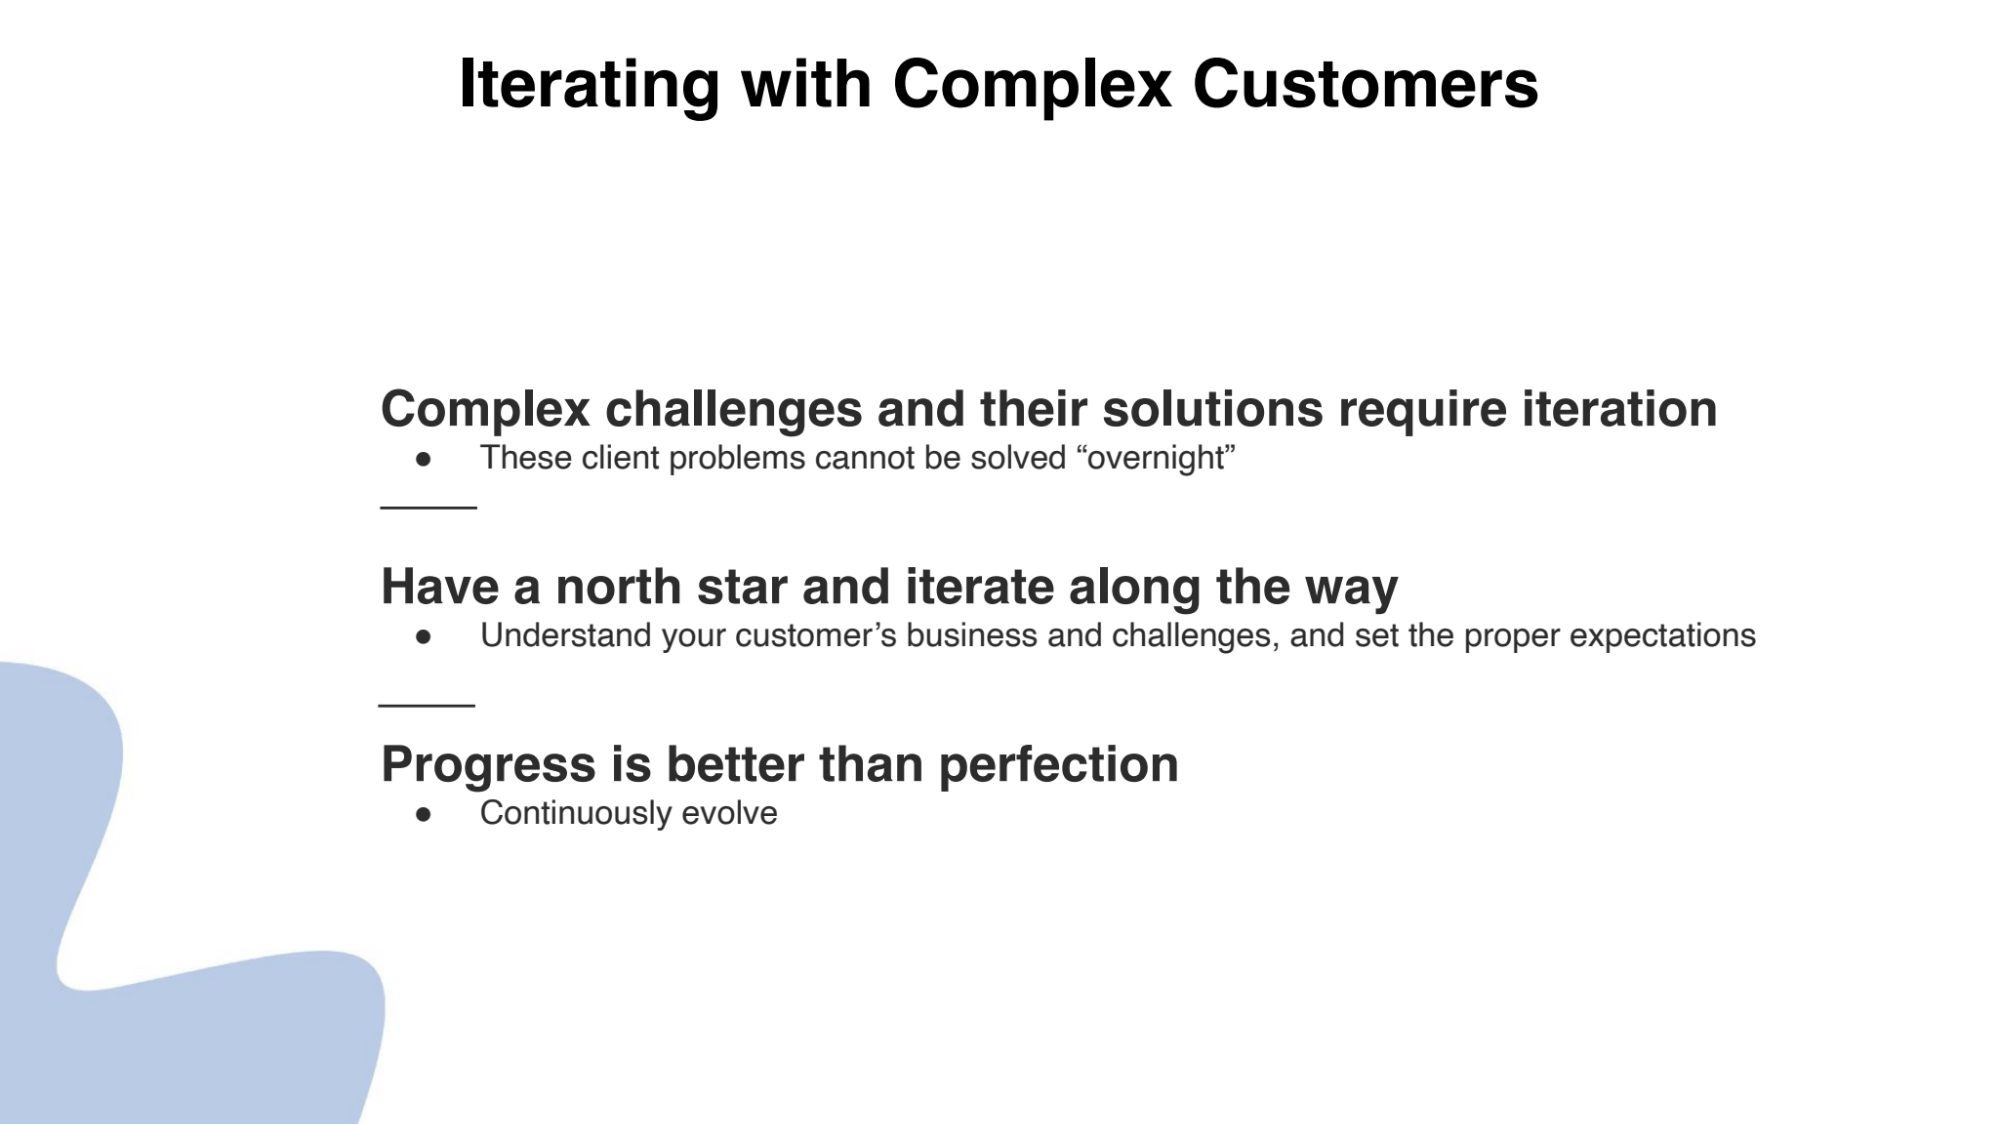 Iterating with complex customers